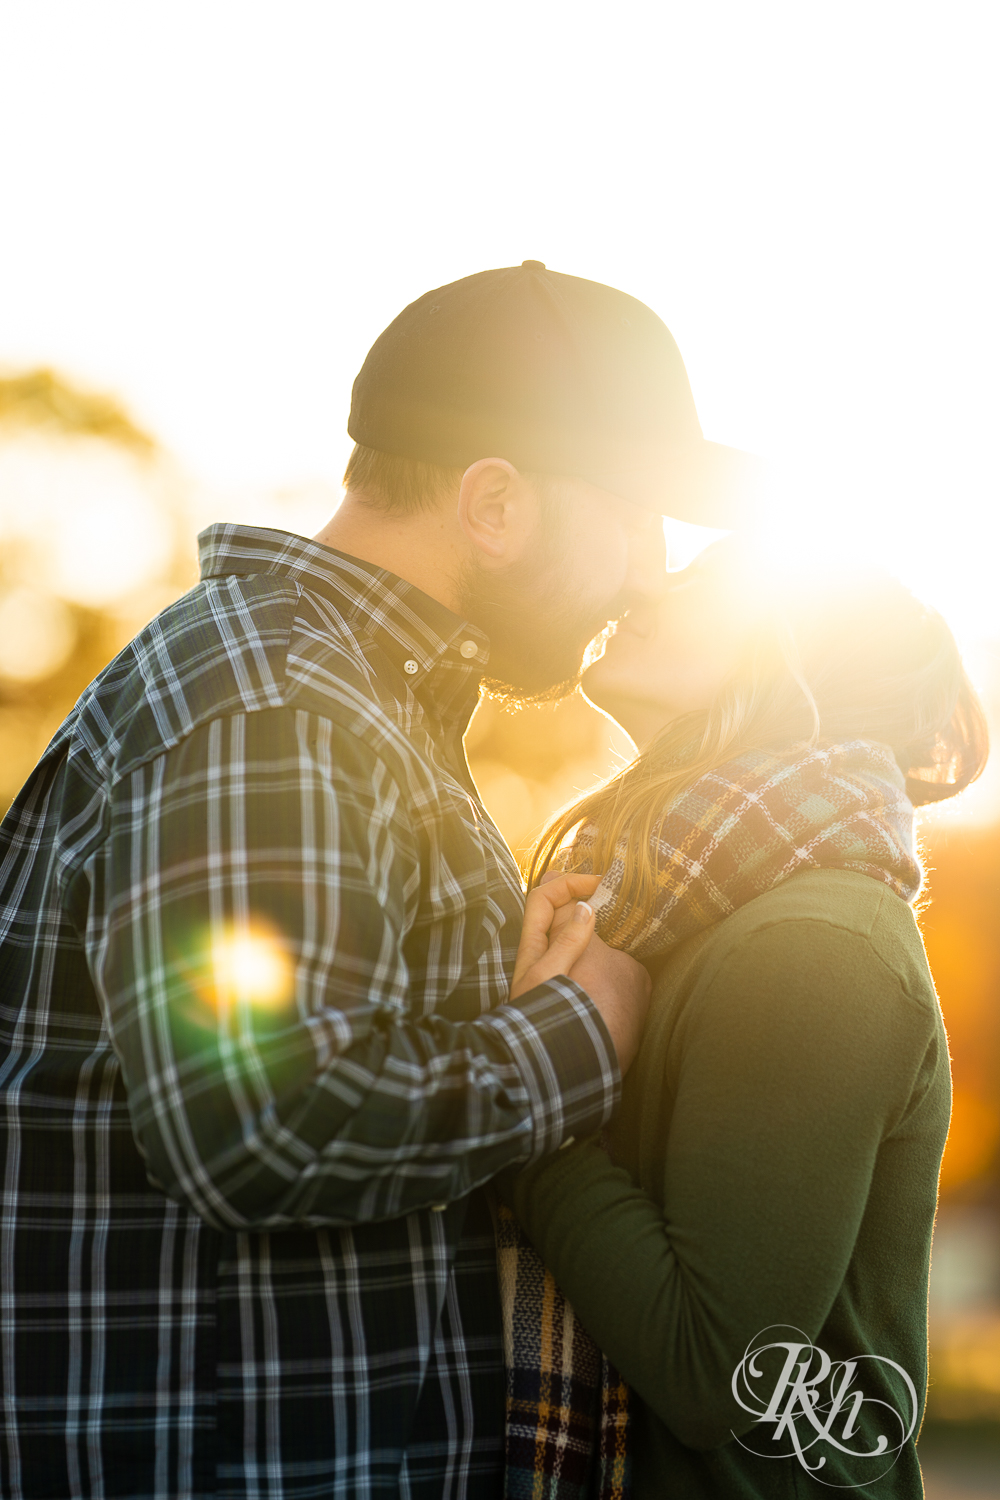 Man in flannel and woman in jeans and sweater kissing during sunset in Eagan, Minnesota.